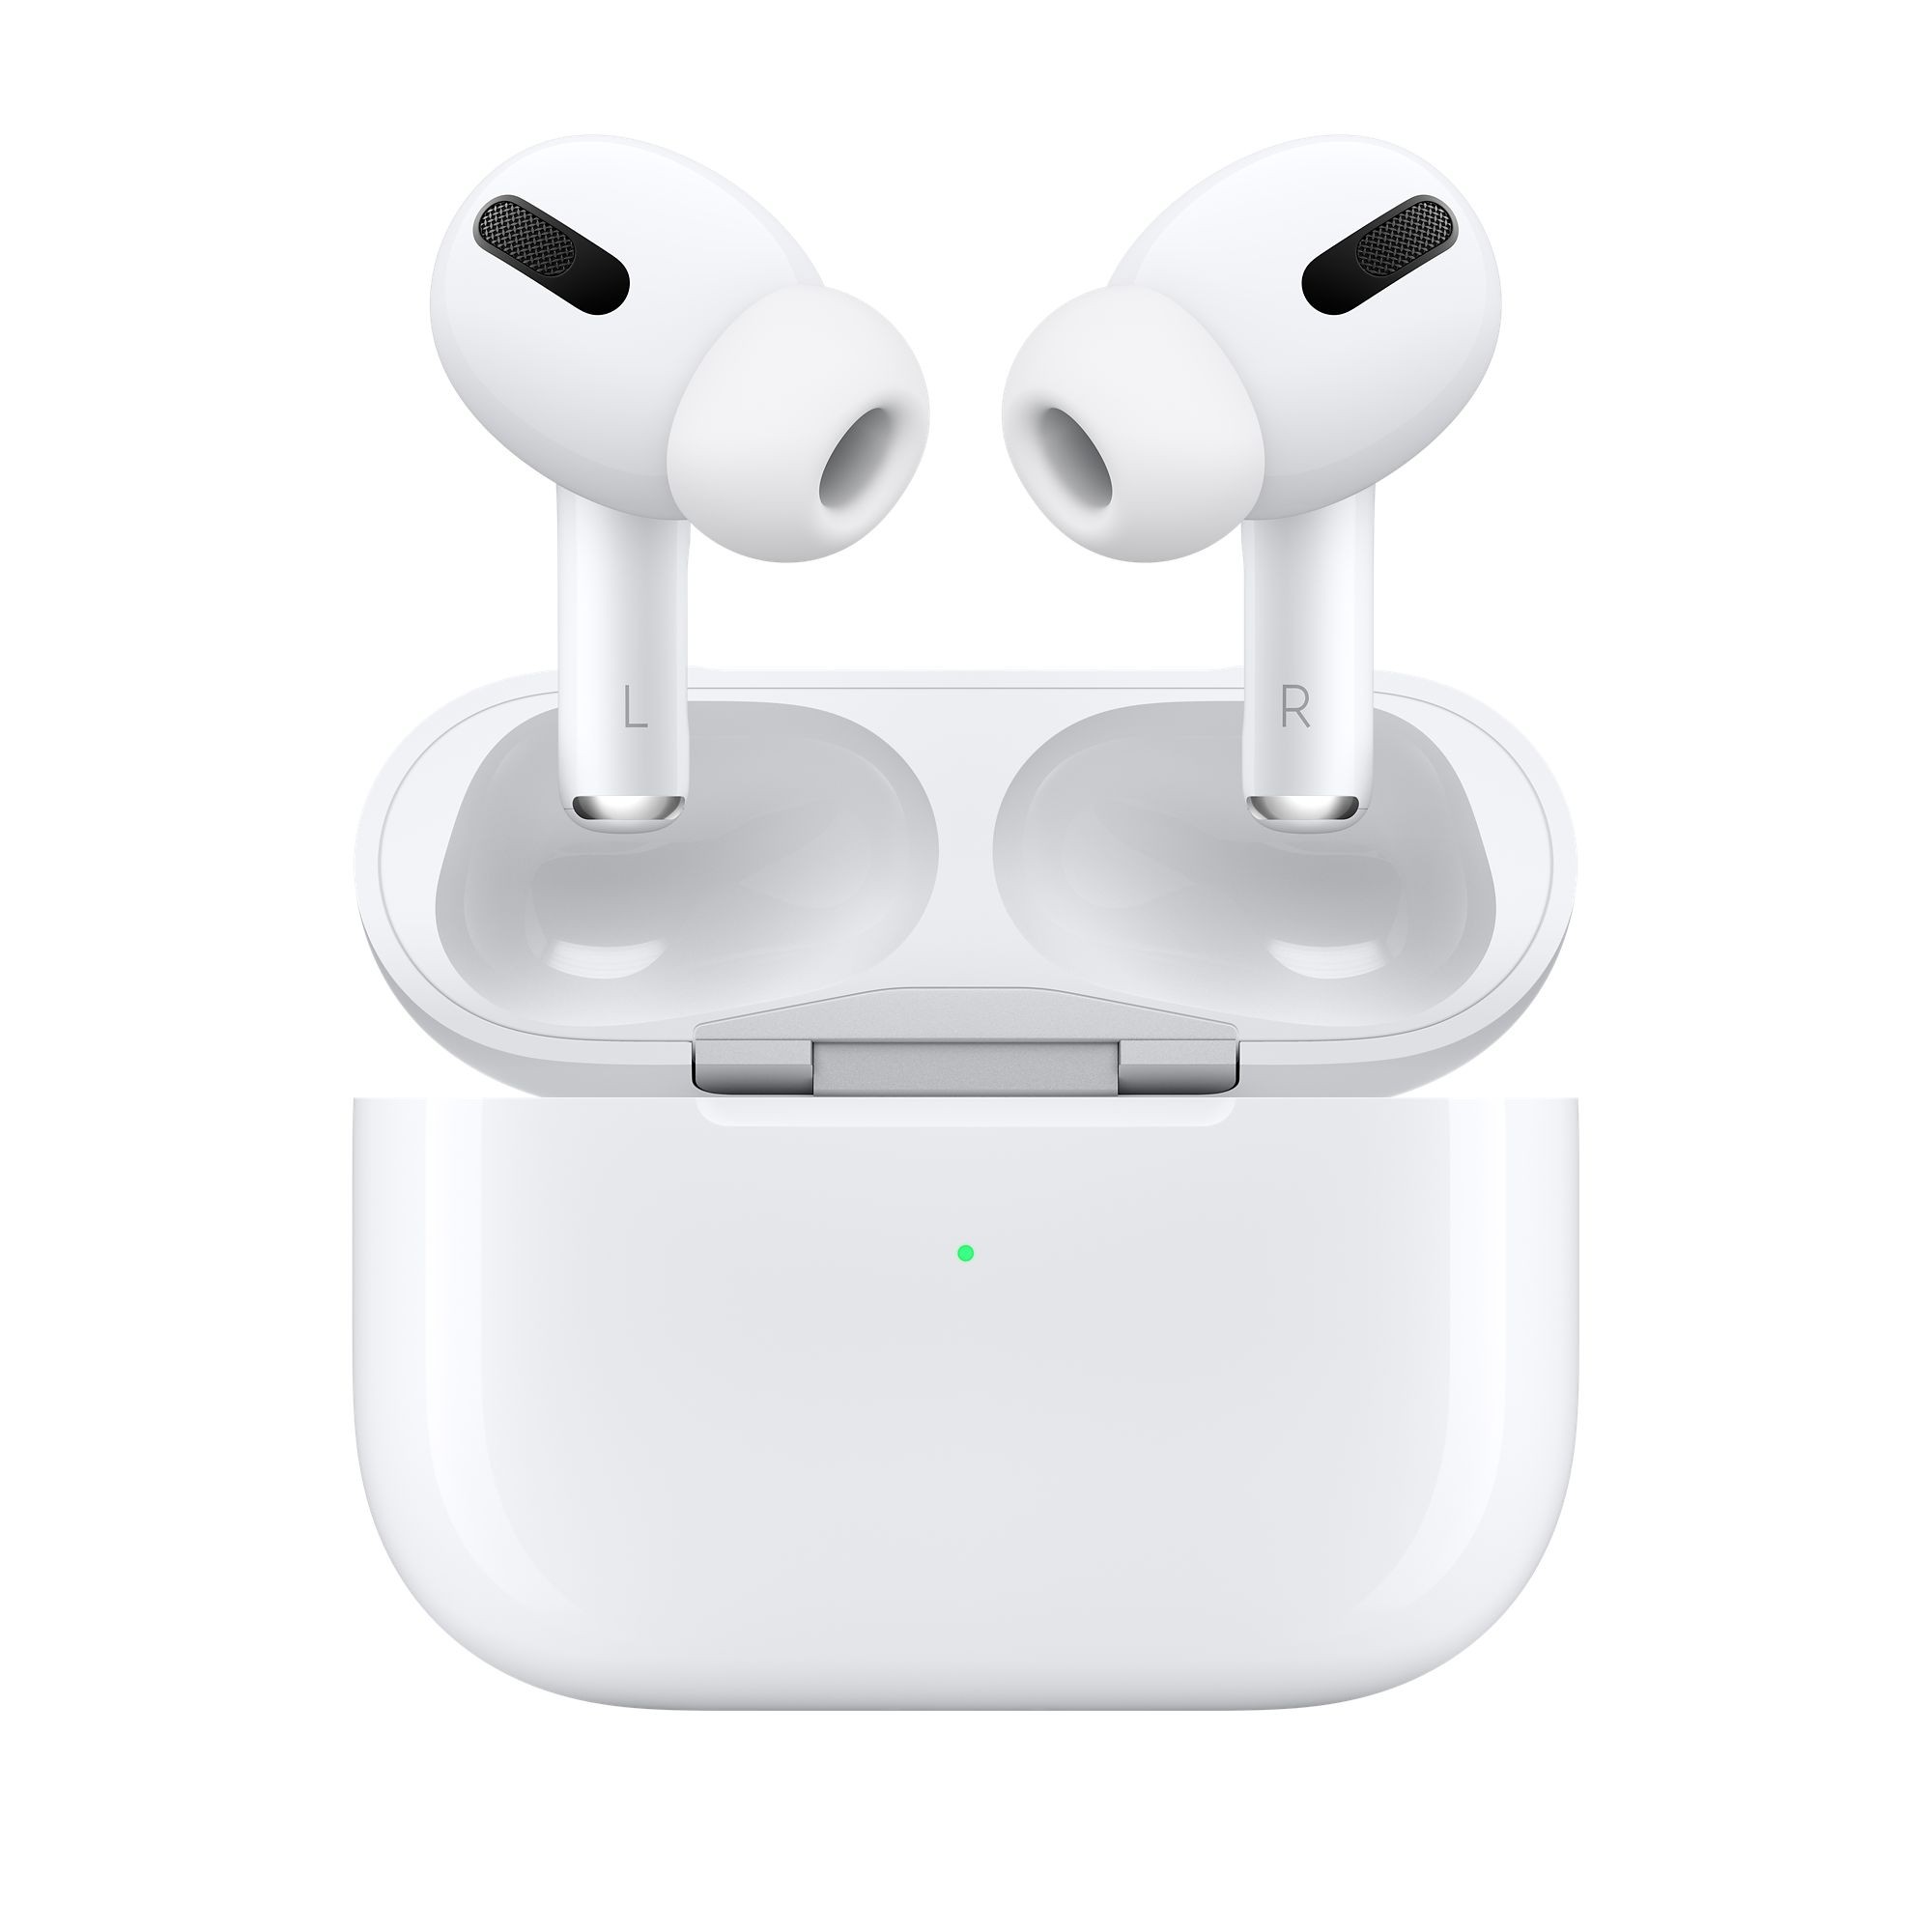 Airpods Pro wireless Bluetooth 5.0 Earphone with Charging Case White Colour Earbuds